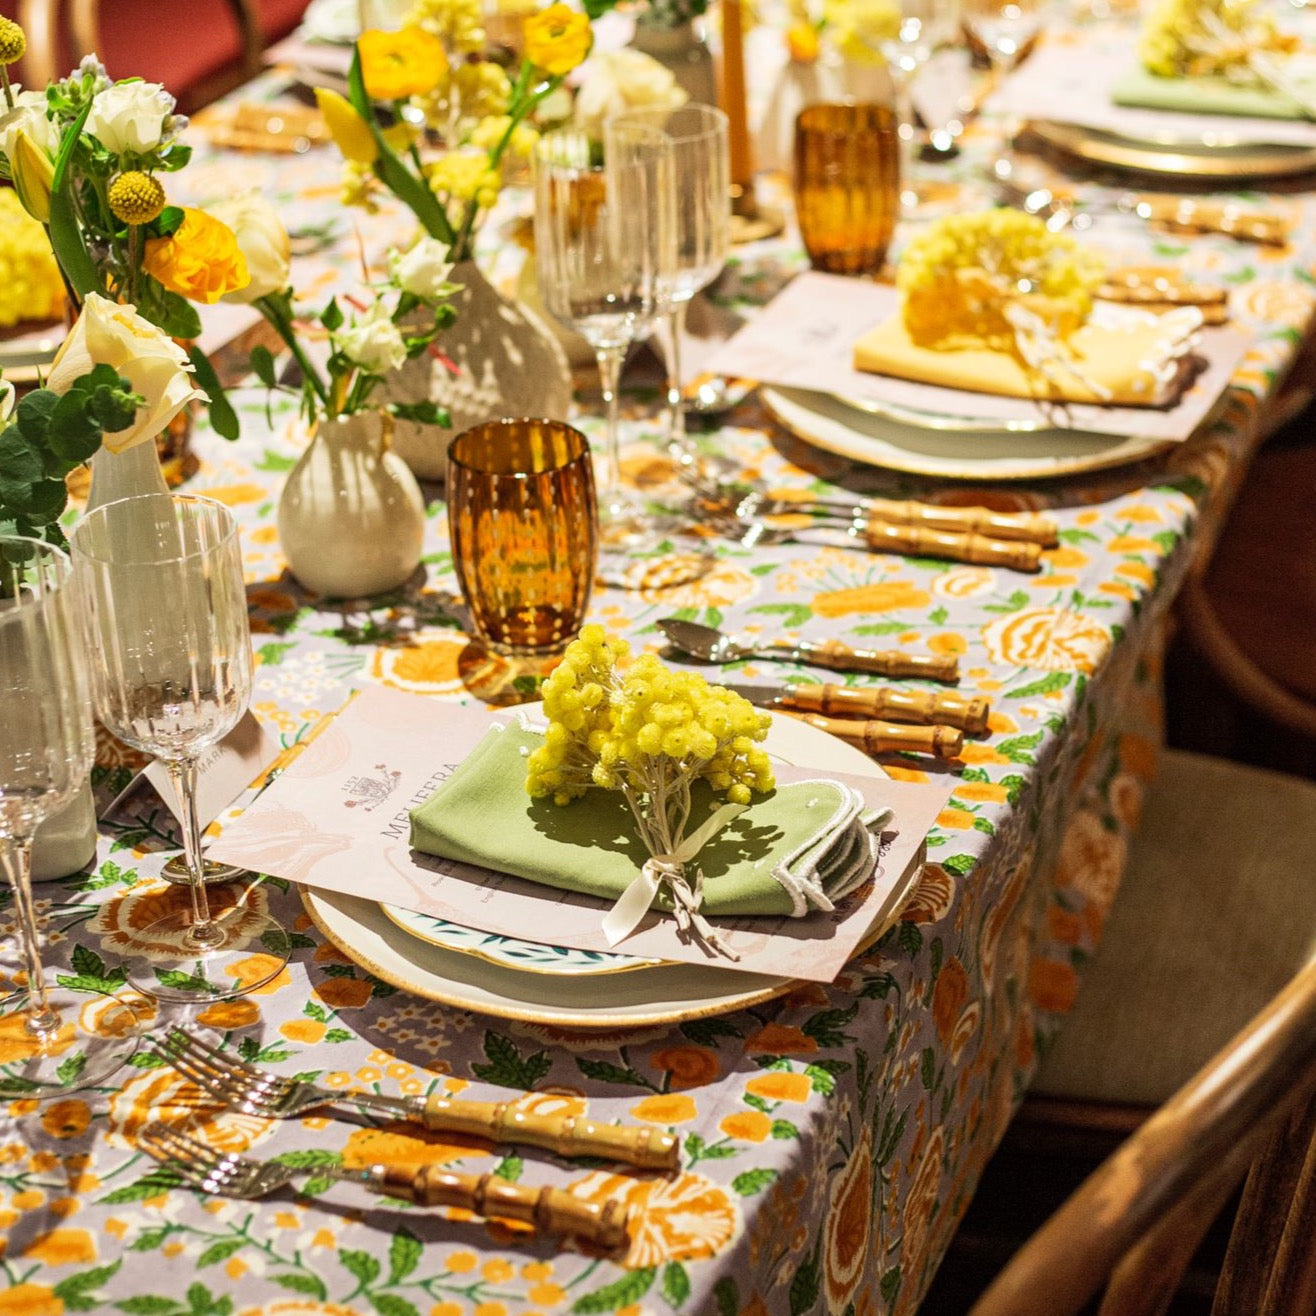 Rent: Penelope Yellow/Grey Tablecloth